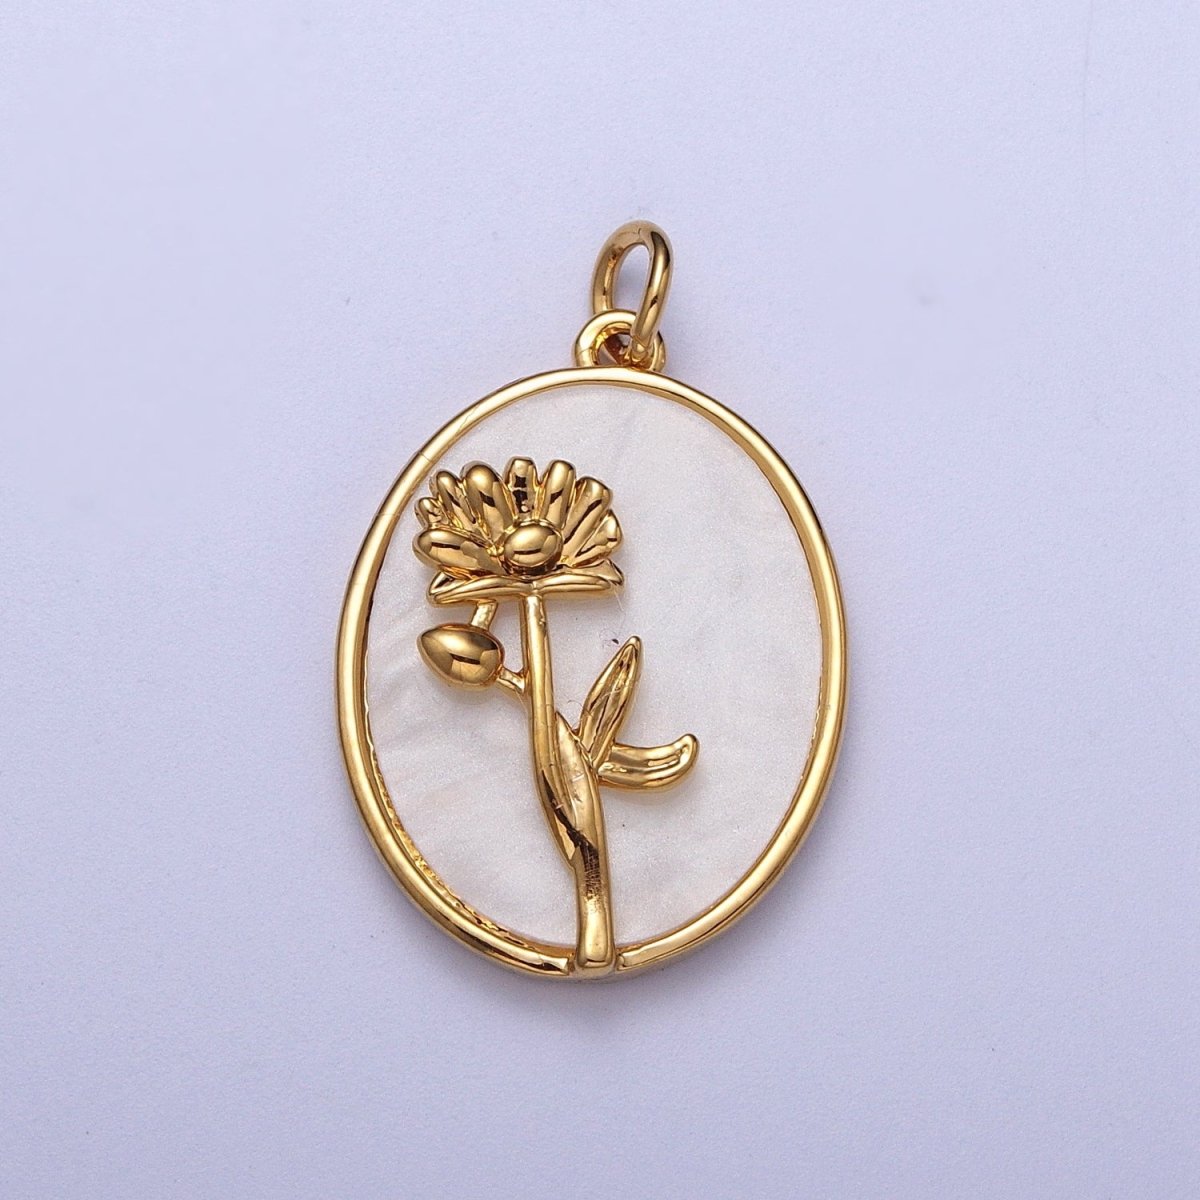 24K Gold Filled Birth Flower Personalized Oval Shell Pearl Charm | D-582 D-605 D-606 D-616 D-619 D-661 D-706 D-765 D-784 D-791 D-888 D-897 - DLUXCA